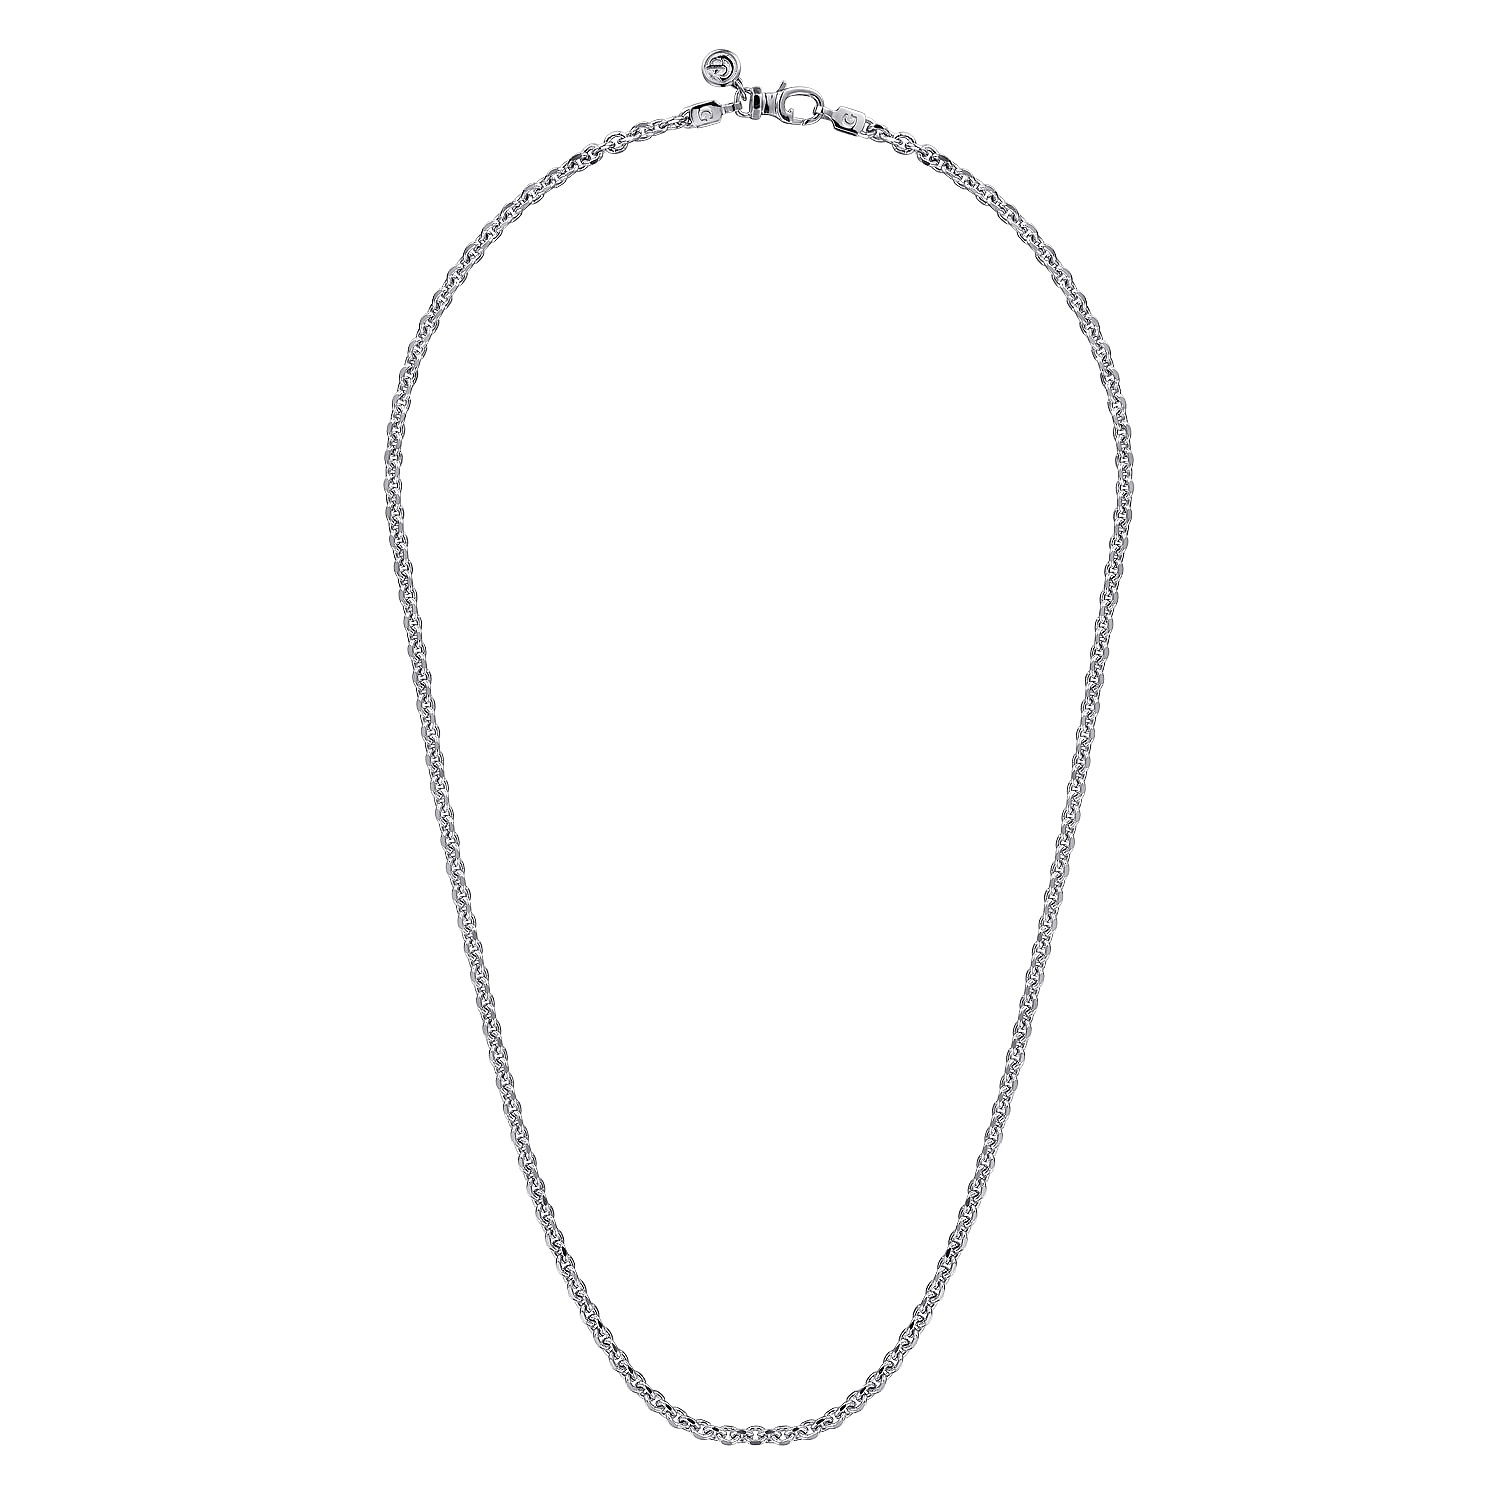 22-Inch-925-Sterling-Silver-Men's-Link-Chain-Necklace-2